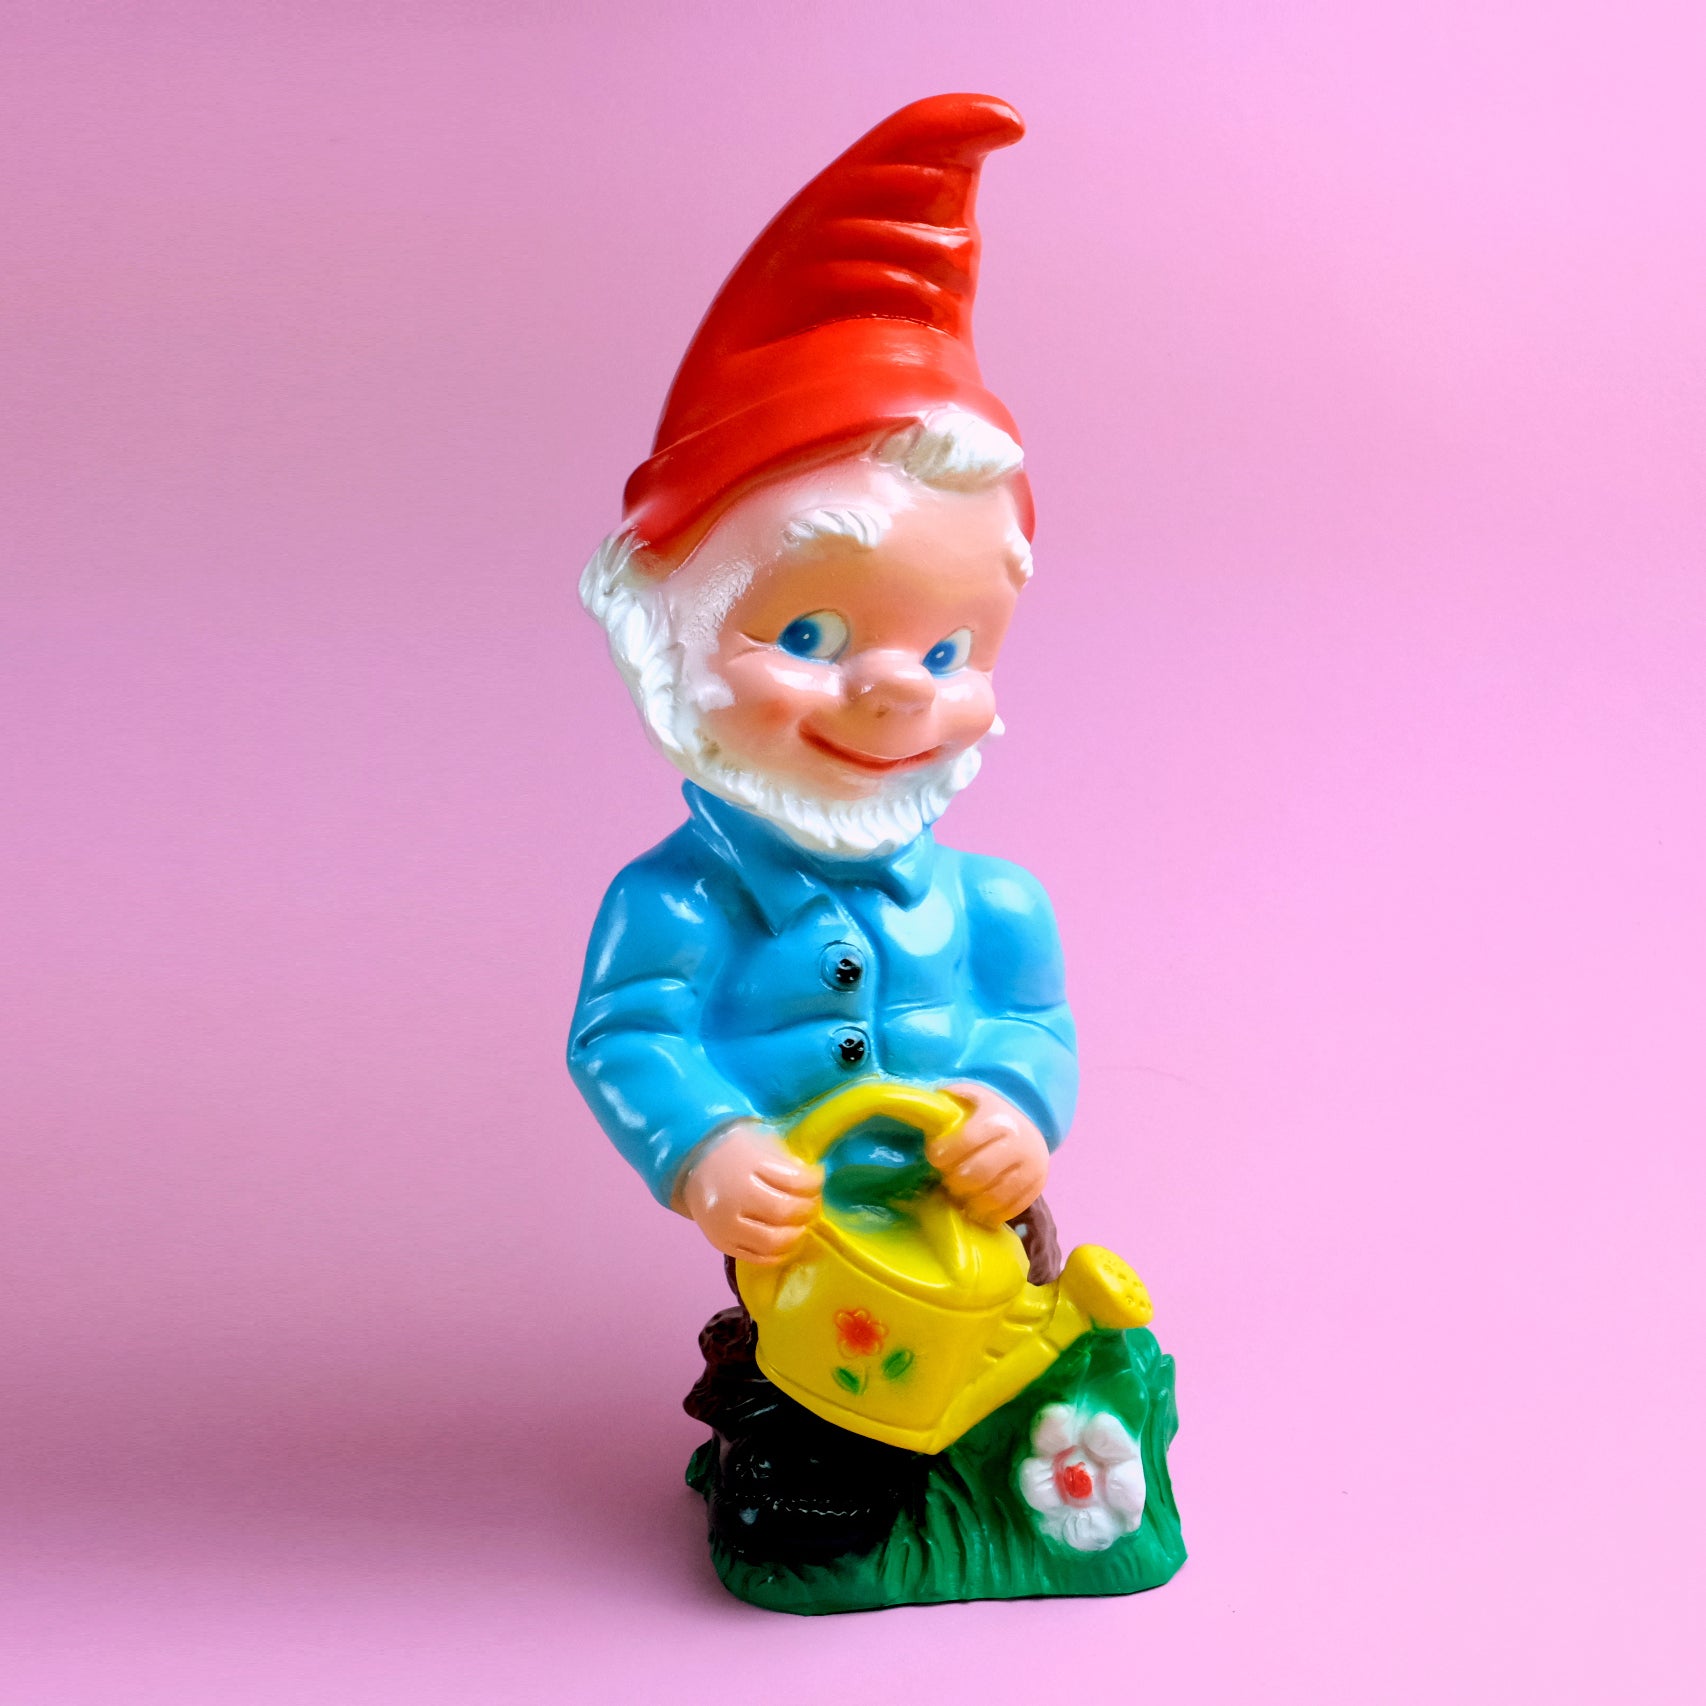 Garden gnome with yellow watering pot